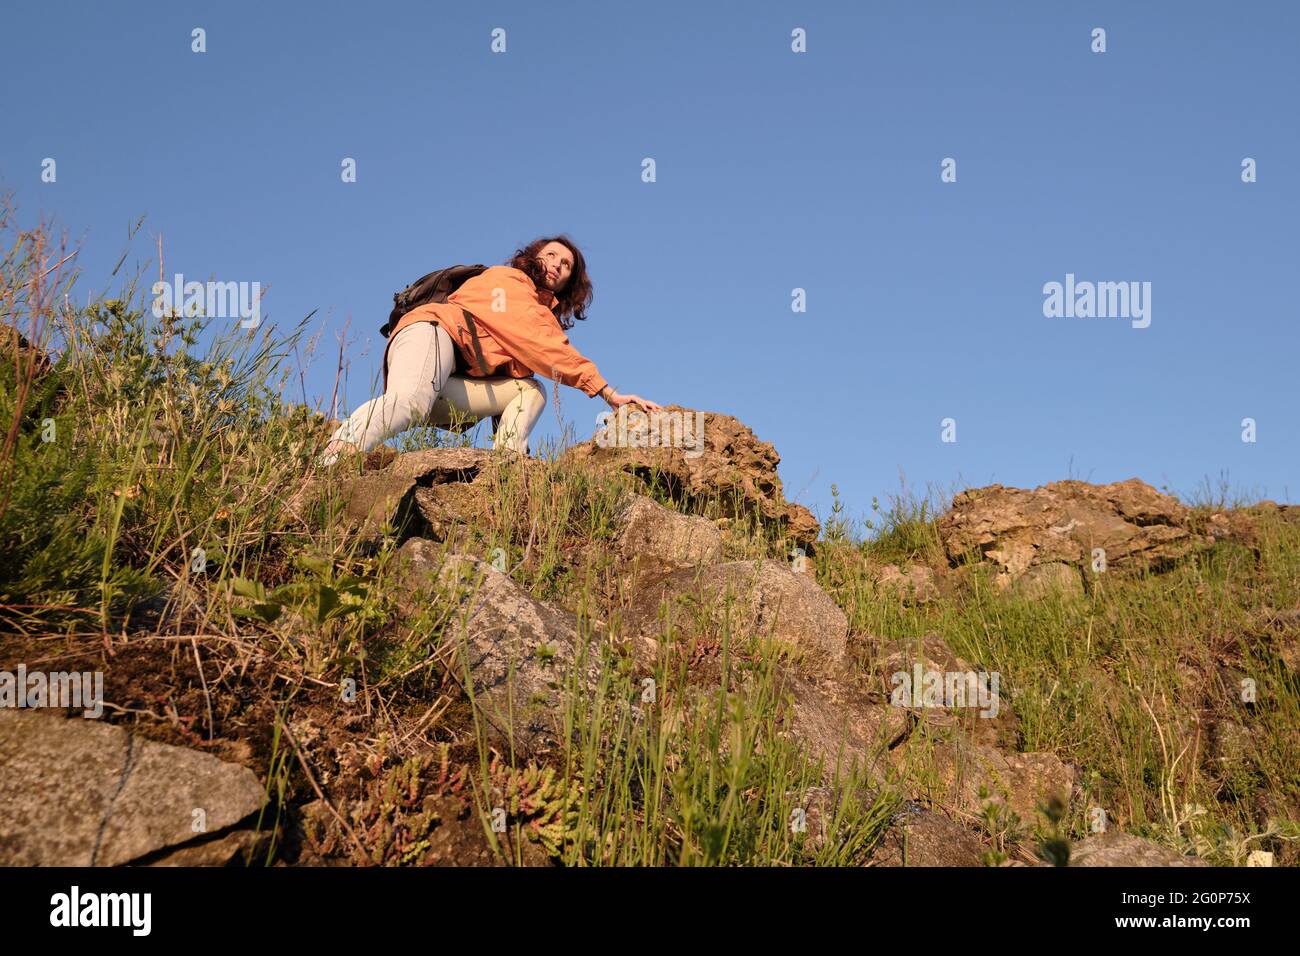 The girl climbs a rocky mountain. Travel outside the city alone. Stock Photo